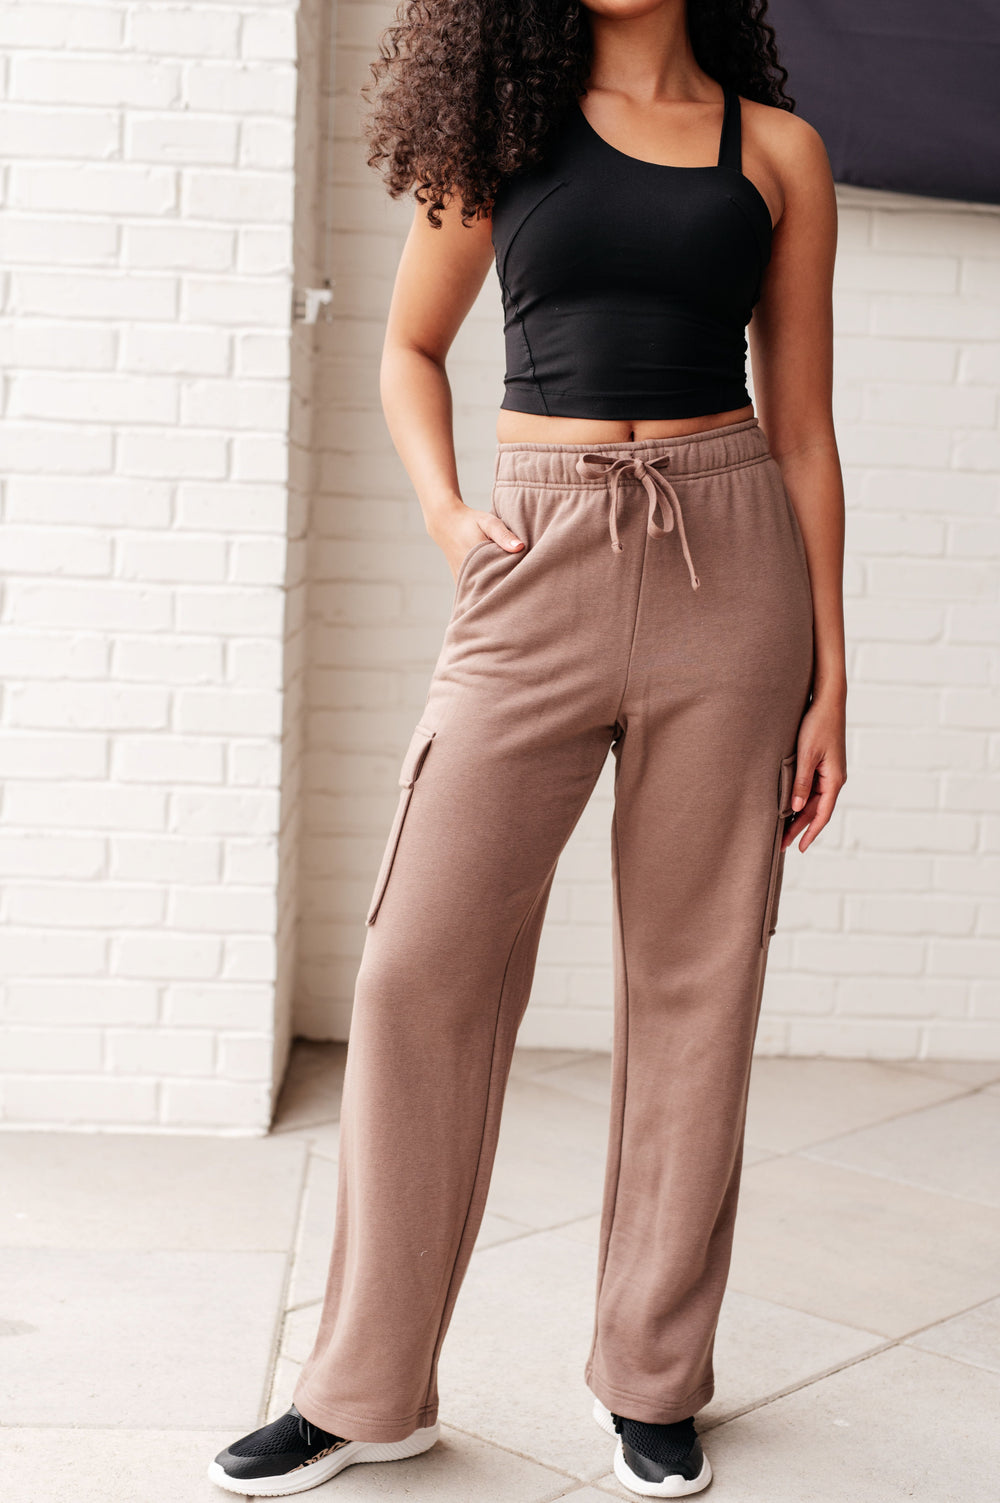 Run, Don't Walk Cargo Sweatpants in Smokey Brown-Athleisure-Inspired by Justeen-Women's Clothing Boutique in Chicago, Illinois